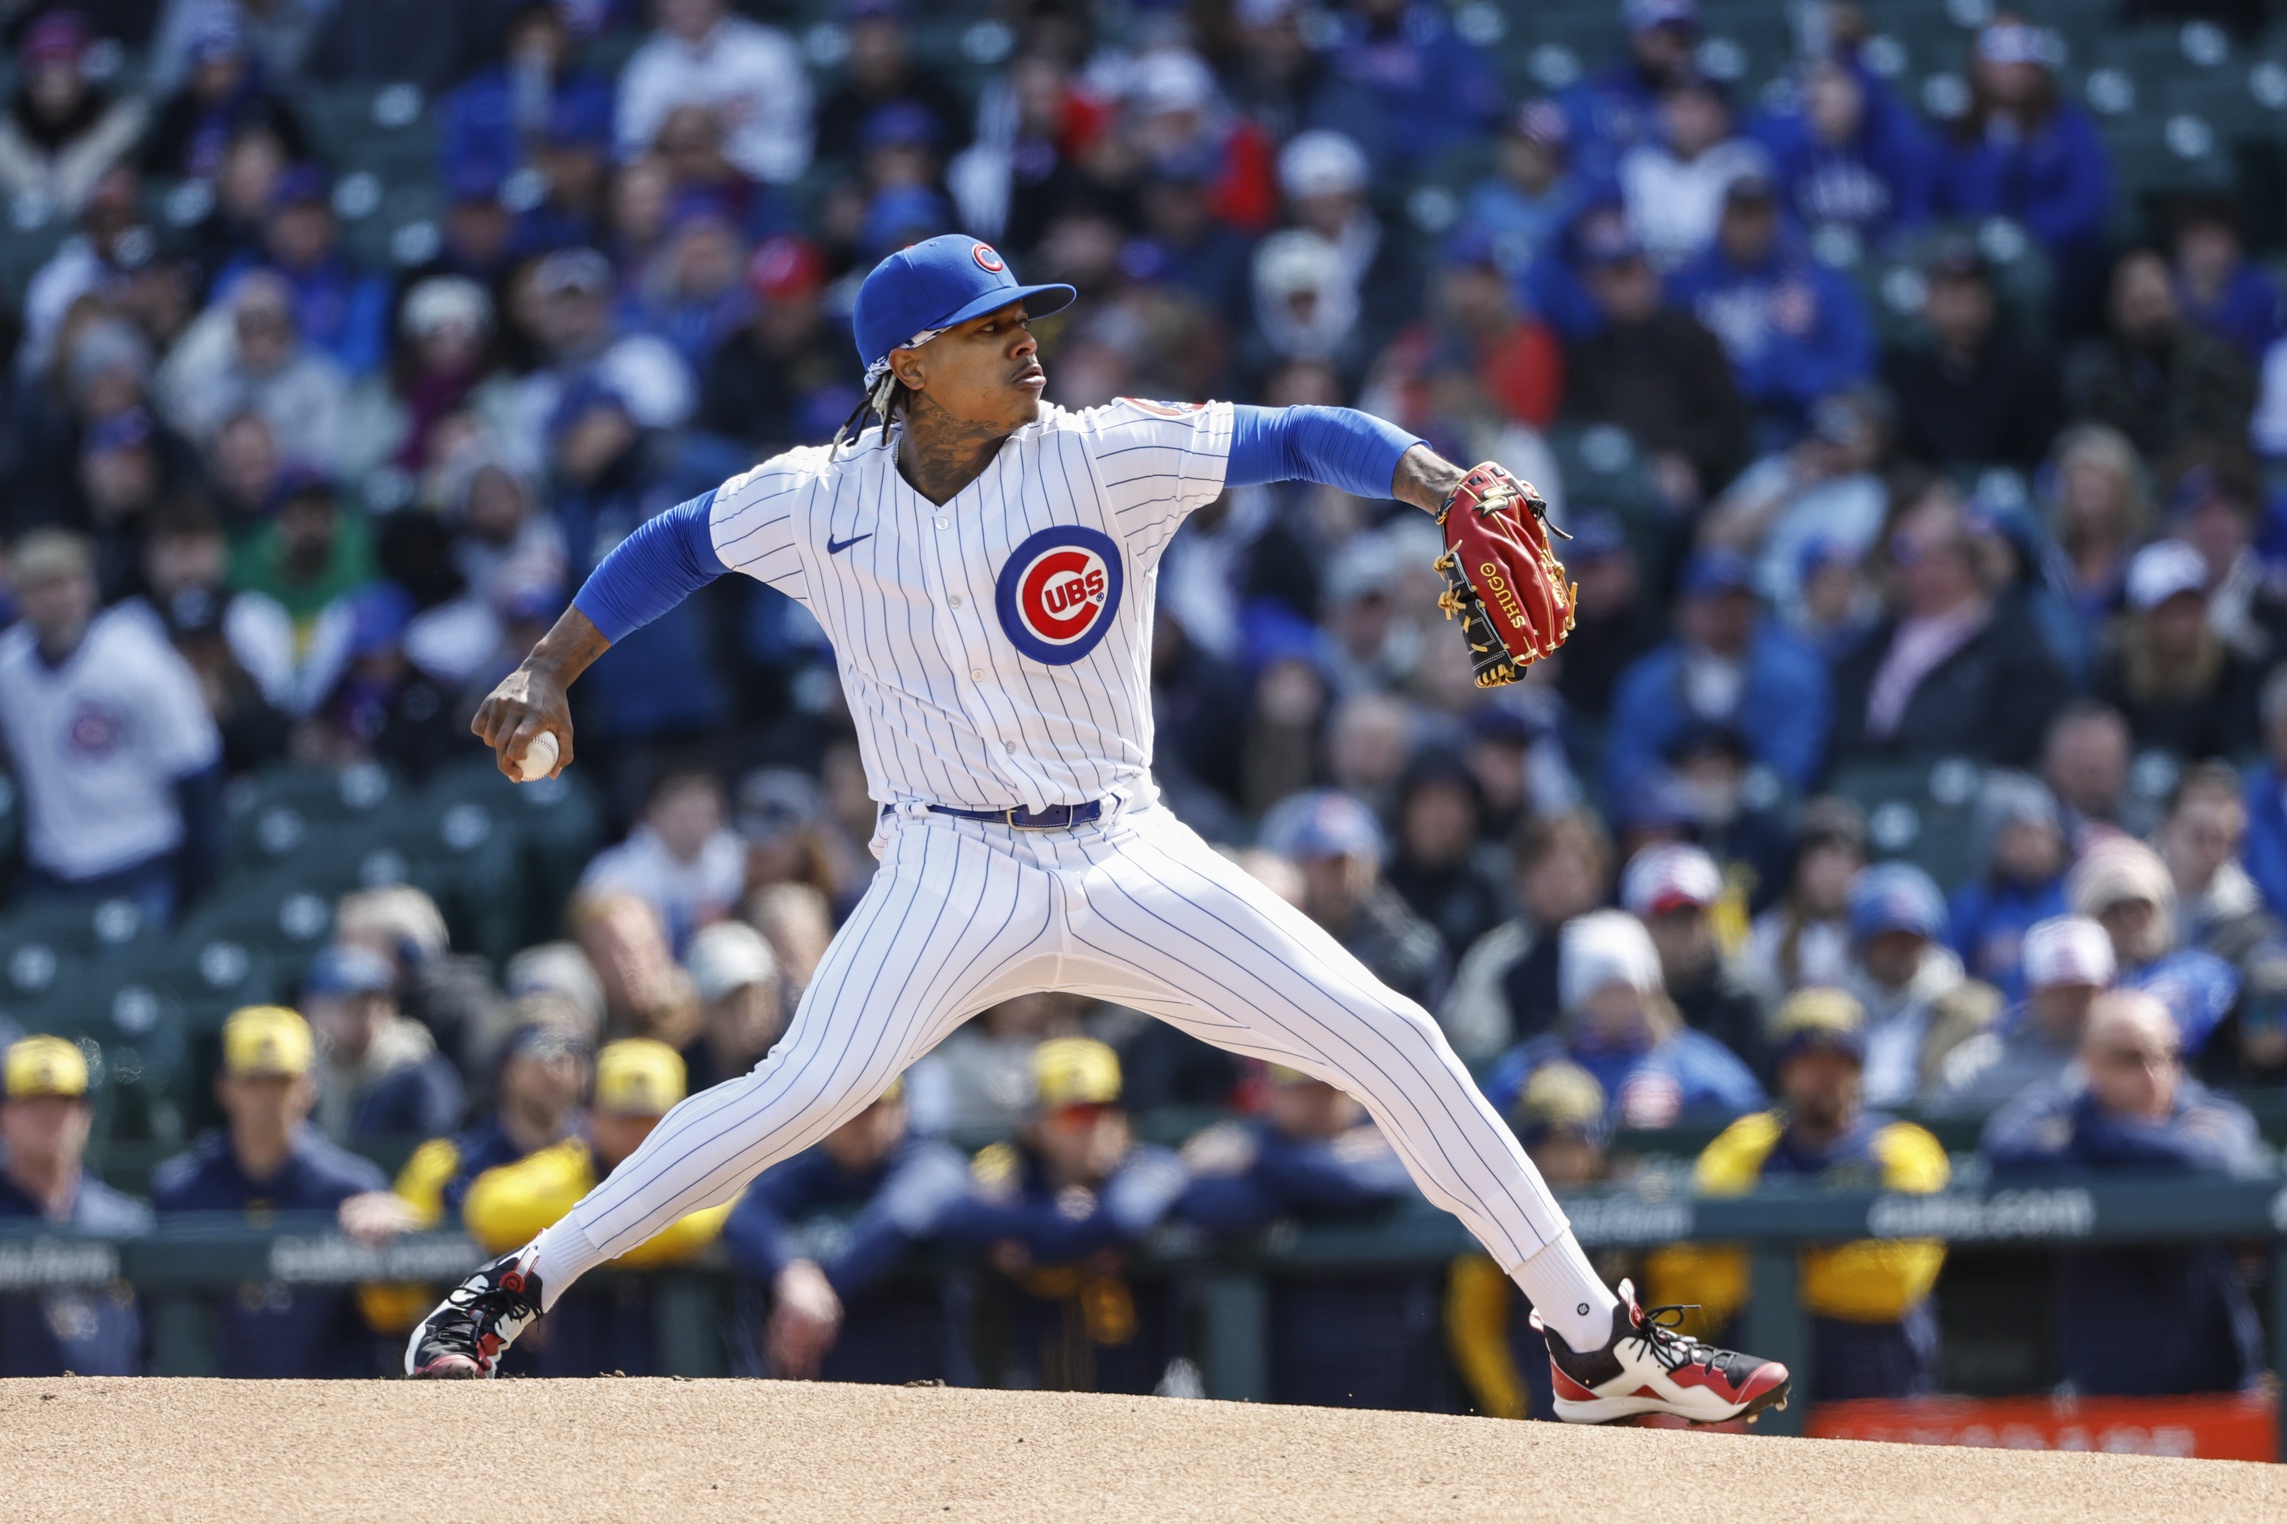 With Kyle Hendricks Down, The Cubs Could See Future In Adbert Alzolay